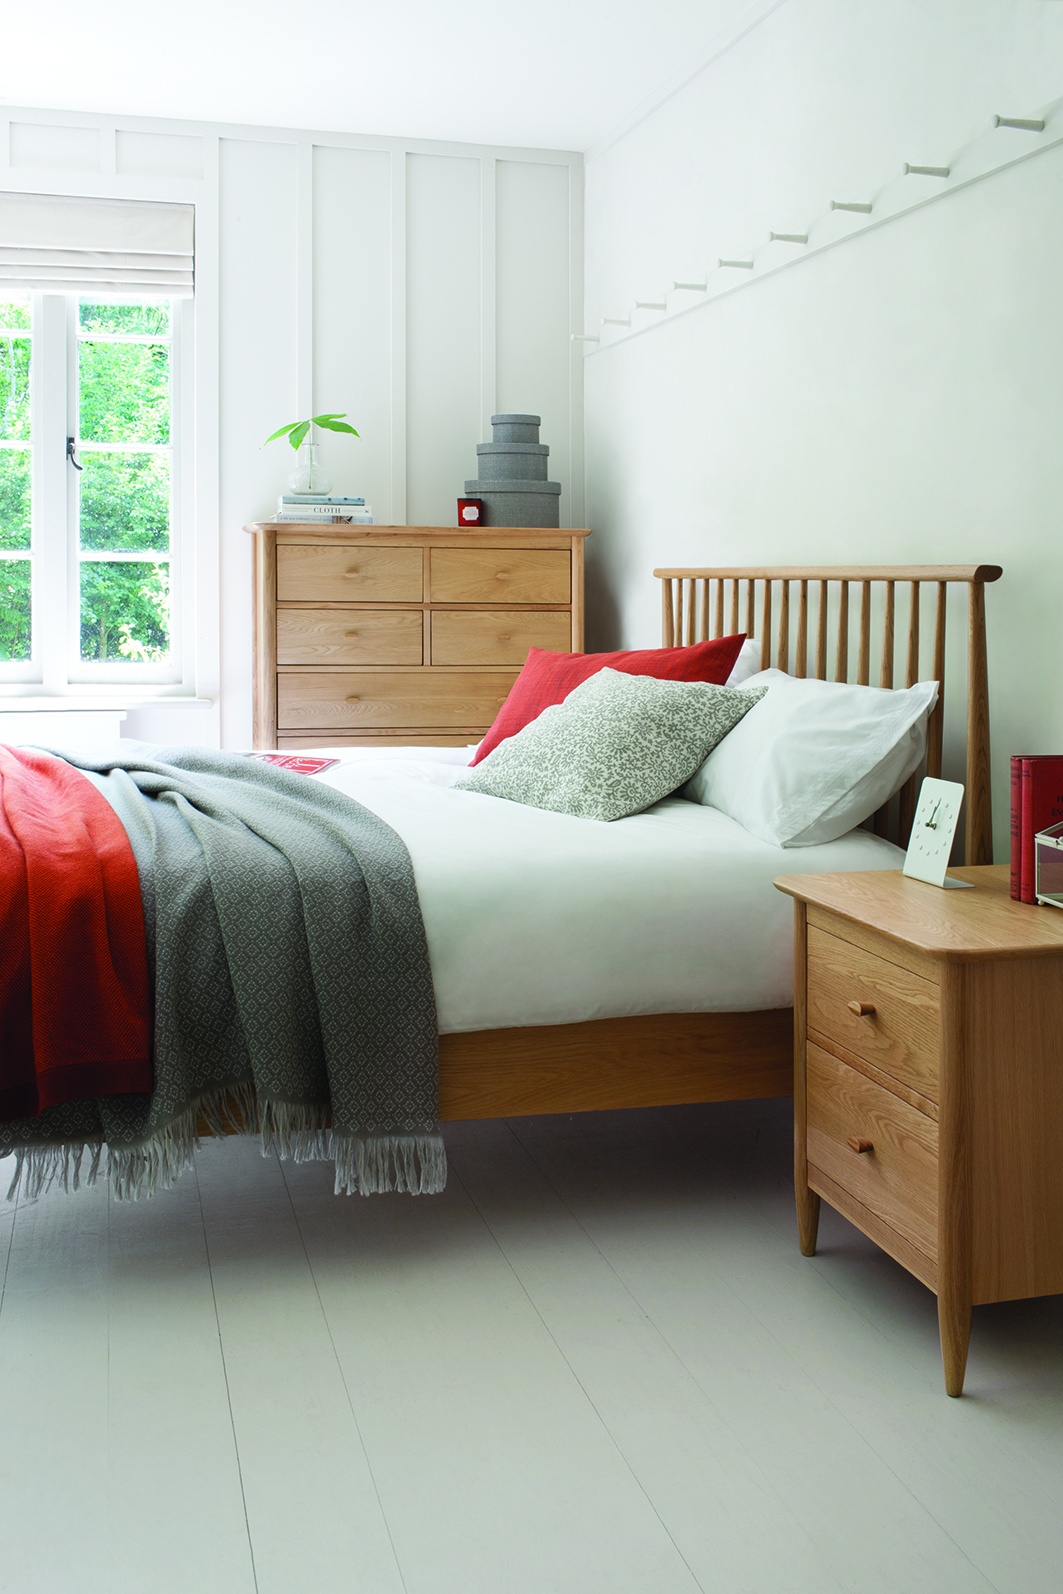 Ercol teramo double bed and bedside table